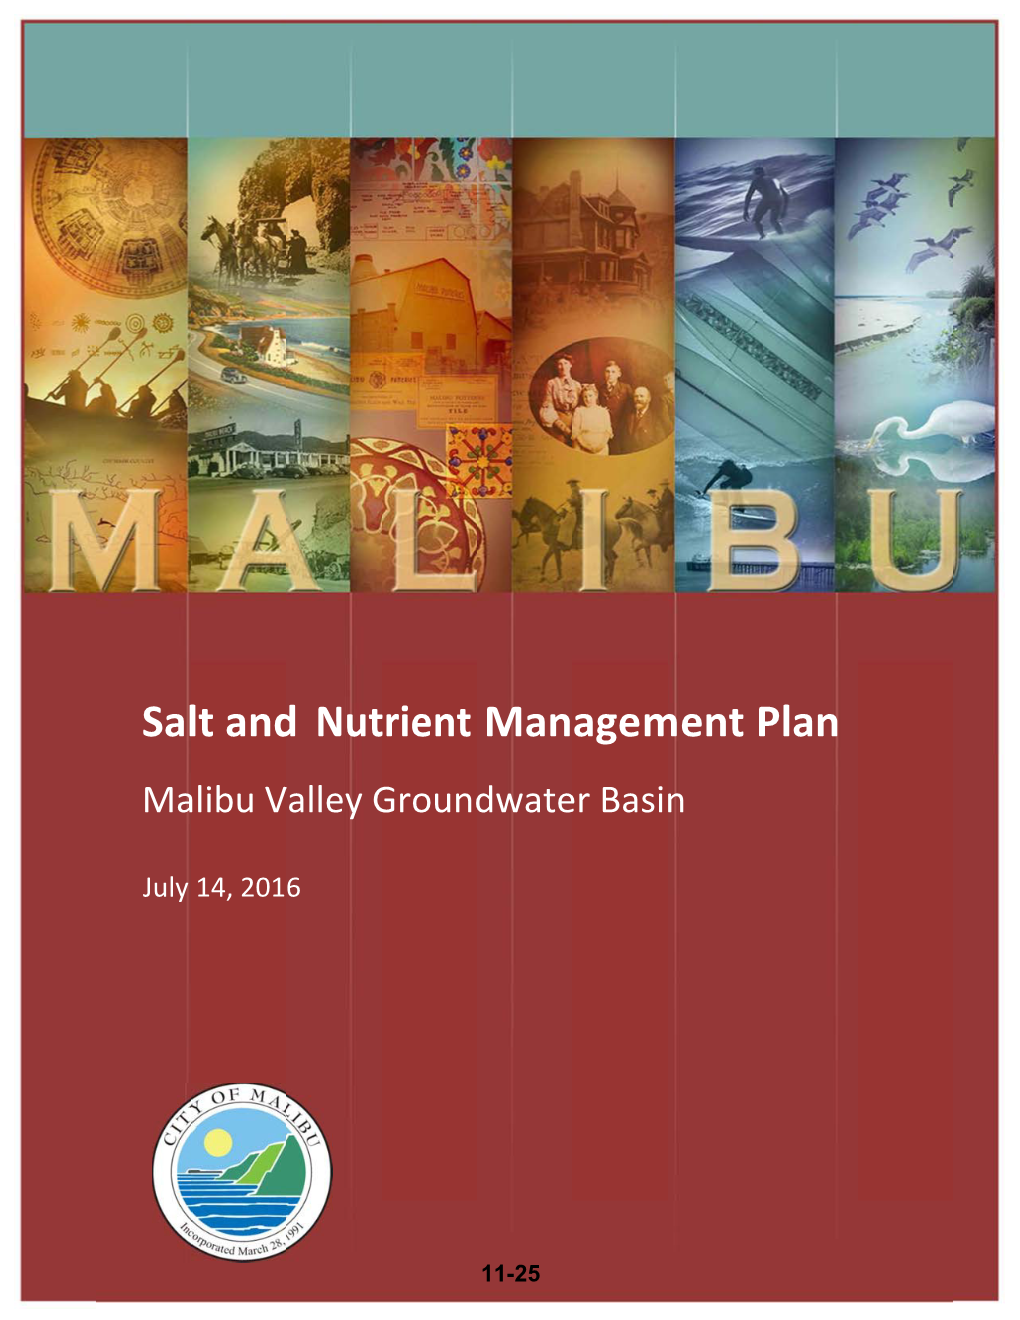 Salt and Nutrient Management Plan for Malibu Valley Groundwater Basin